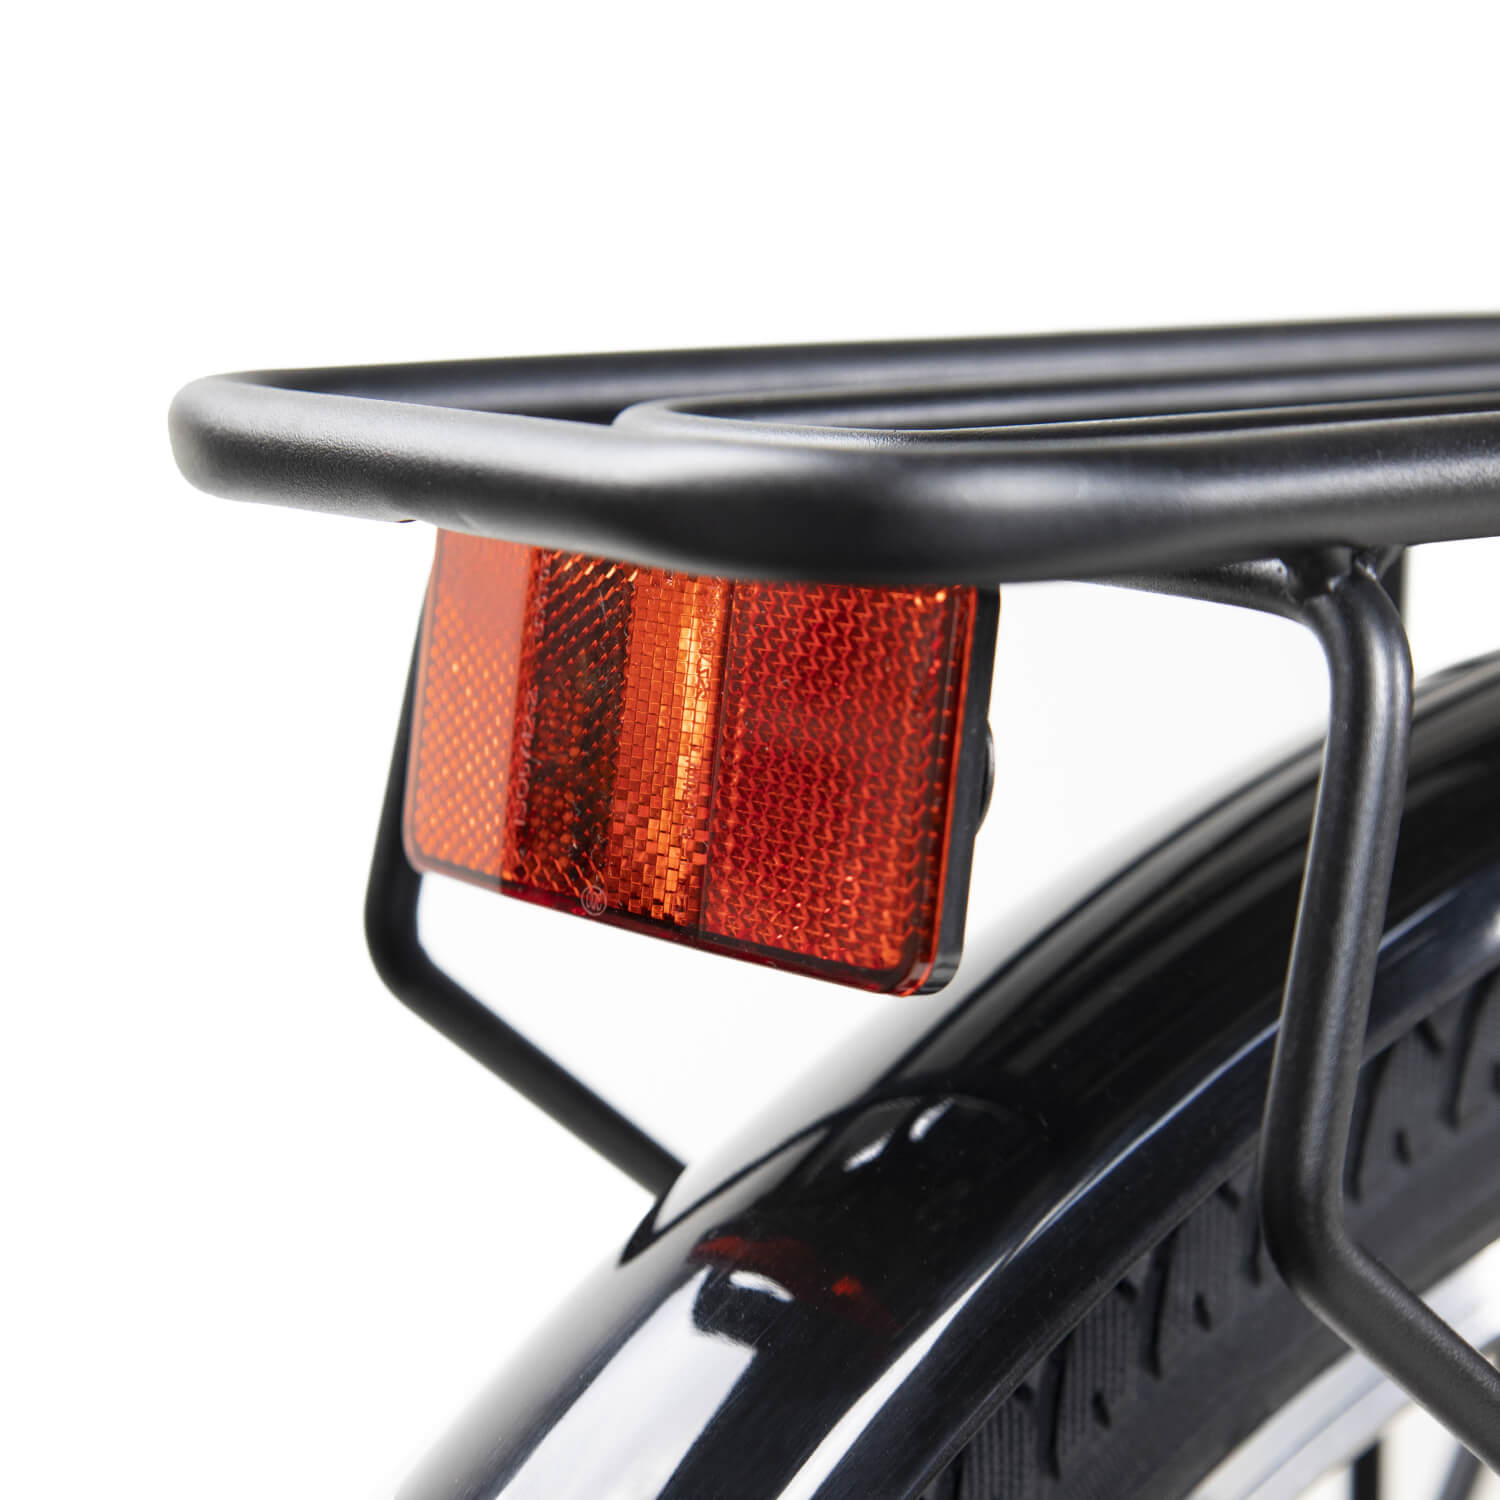 LED Headlights and seat with light for safe riding